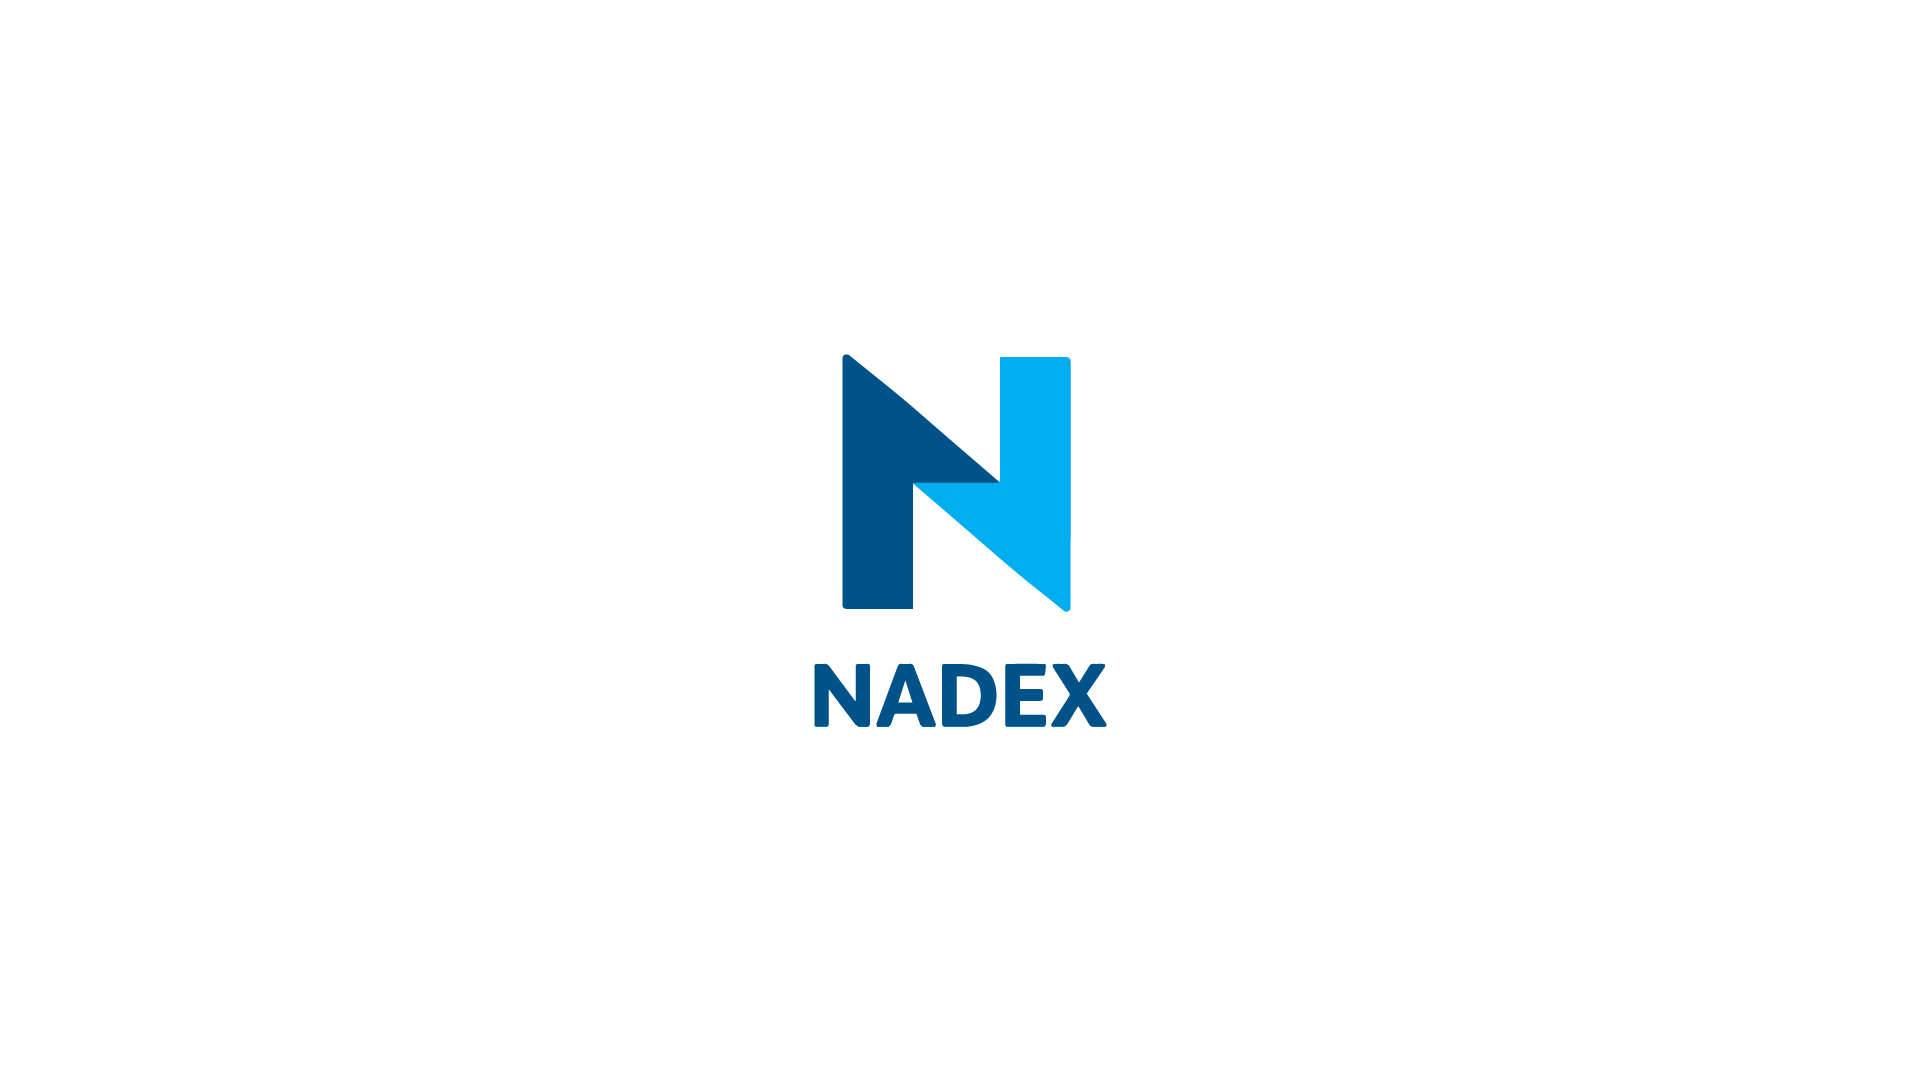 Trading Nadex Binary Options | Trade2Win Forums • UK Financial Trading Community